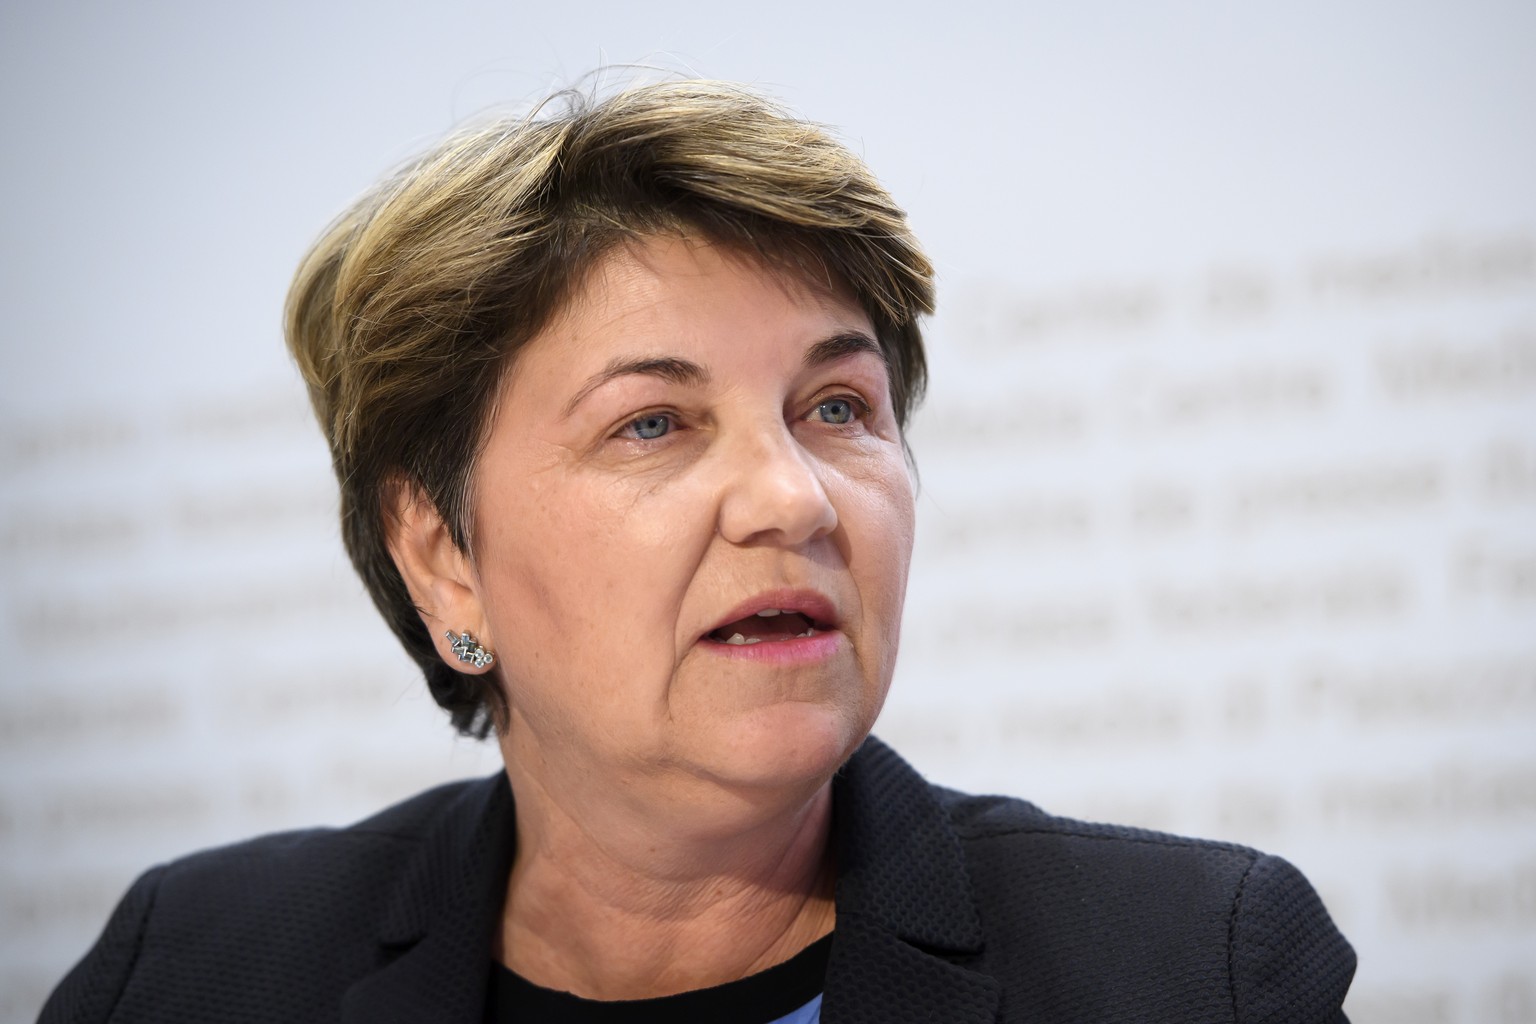 Swiss Federal councillor Viola Amherd briefs the media about the latest measures to fight the Covid-19 Coronavirus pandemic, in Bern, Switzerland, Monday, March 16, 2020.(KEYSTONE/Anthony Anex)